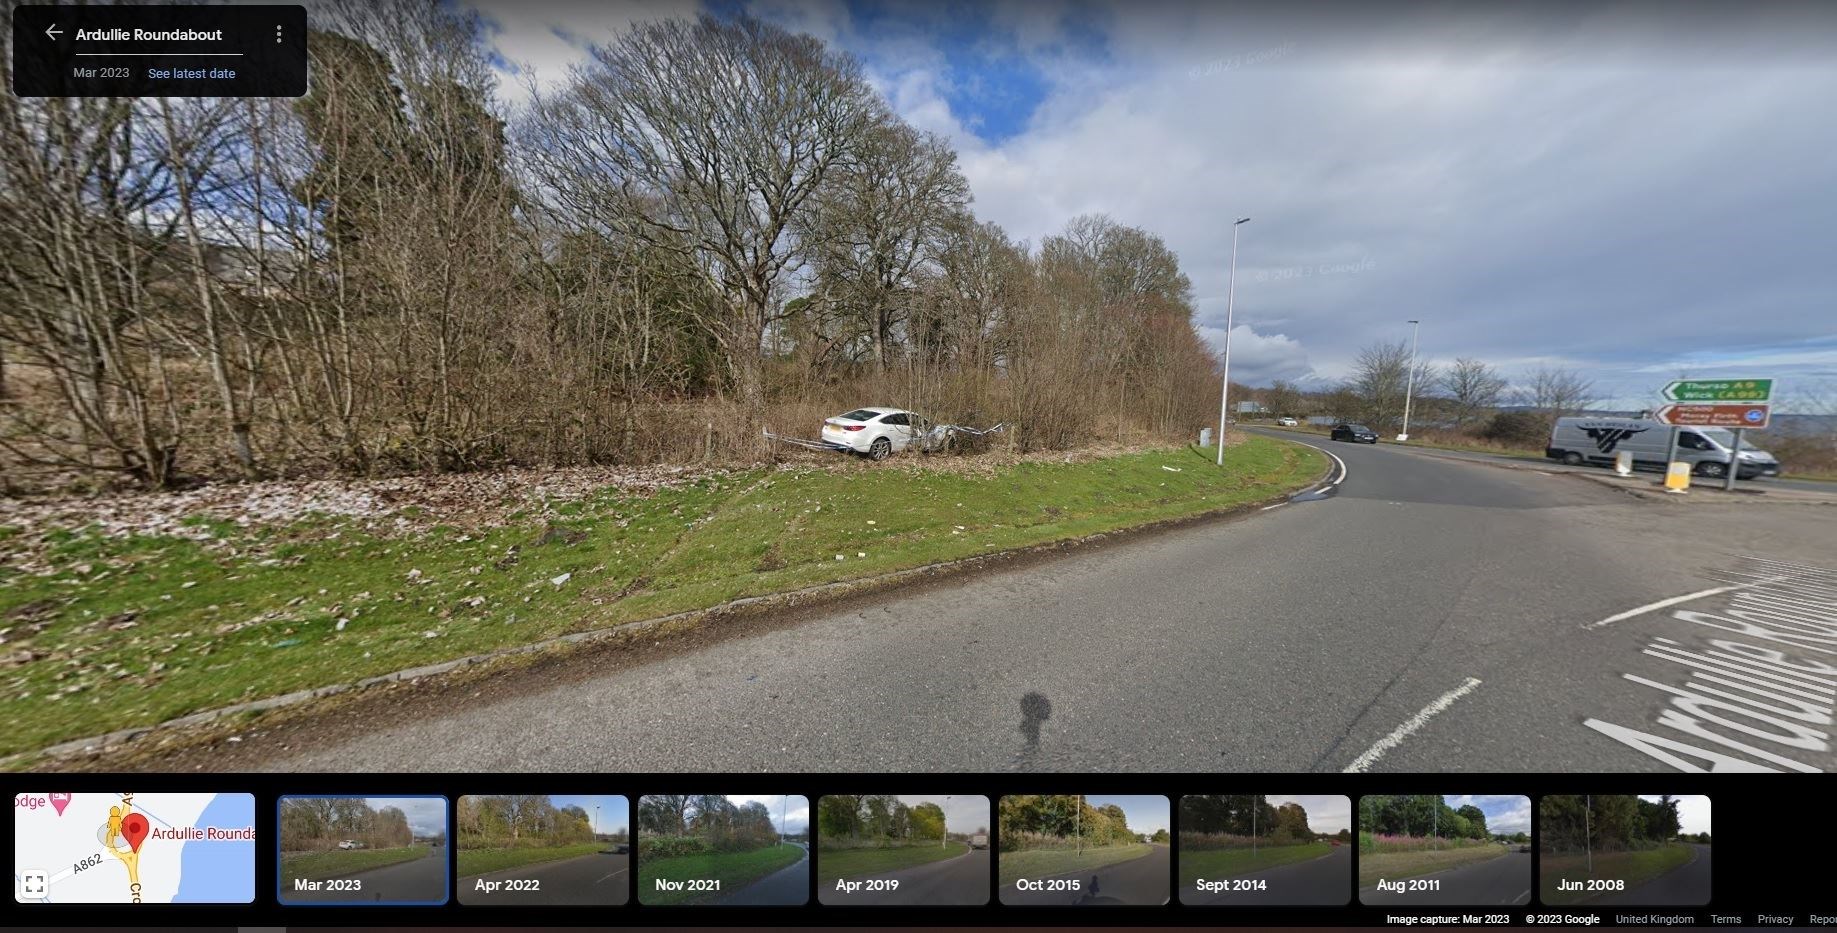 Google Street View's camera cars have now captured images of the Mazda during their most recent pass of the area. Picture: Google Street View.